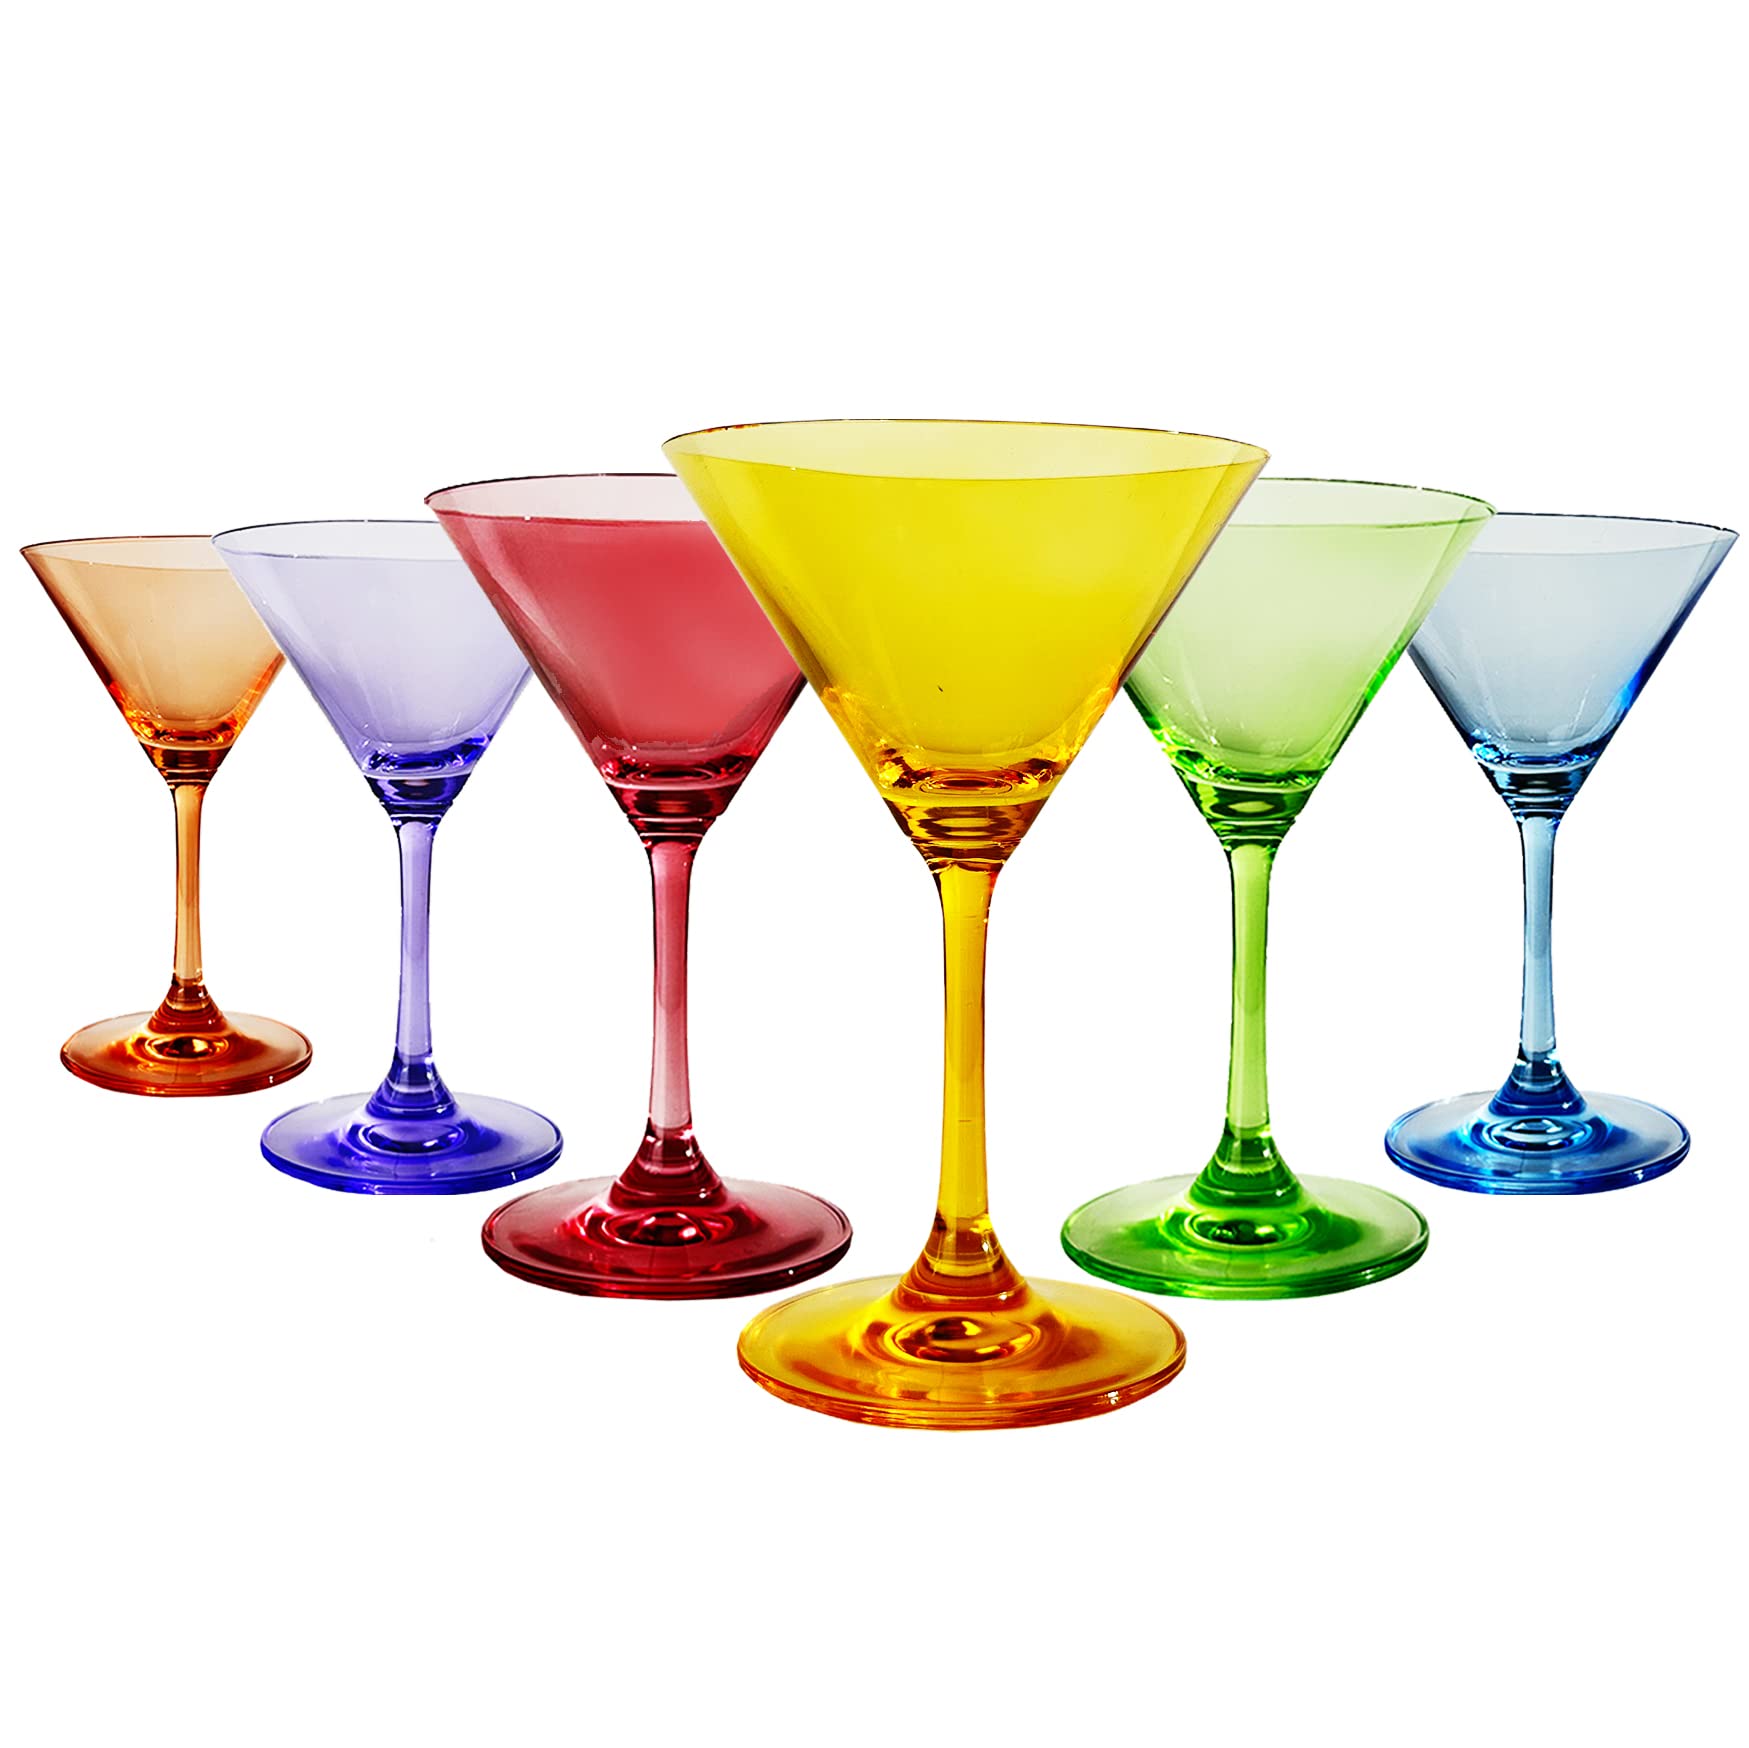 The Wine Savant Martini Glasses Set of 6, 8oz, Crystal Luxury Martini Glass - Elegant Colors, Hand-Blown, Art Deco Cocktail Colored Coupes For Manhattan, Cosmopolitan, Sidecar, Stemmed Goblets